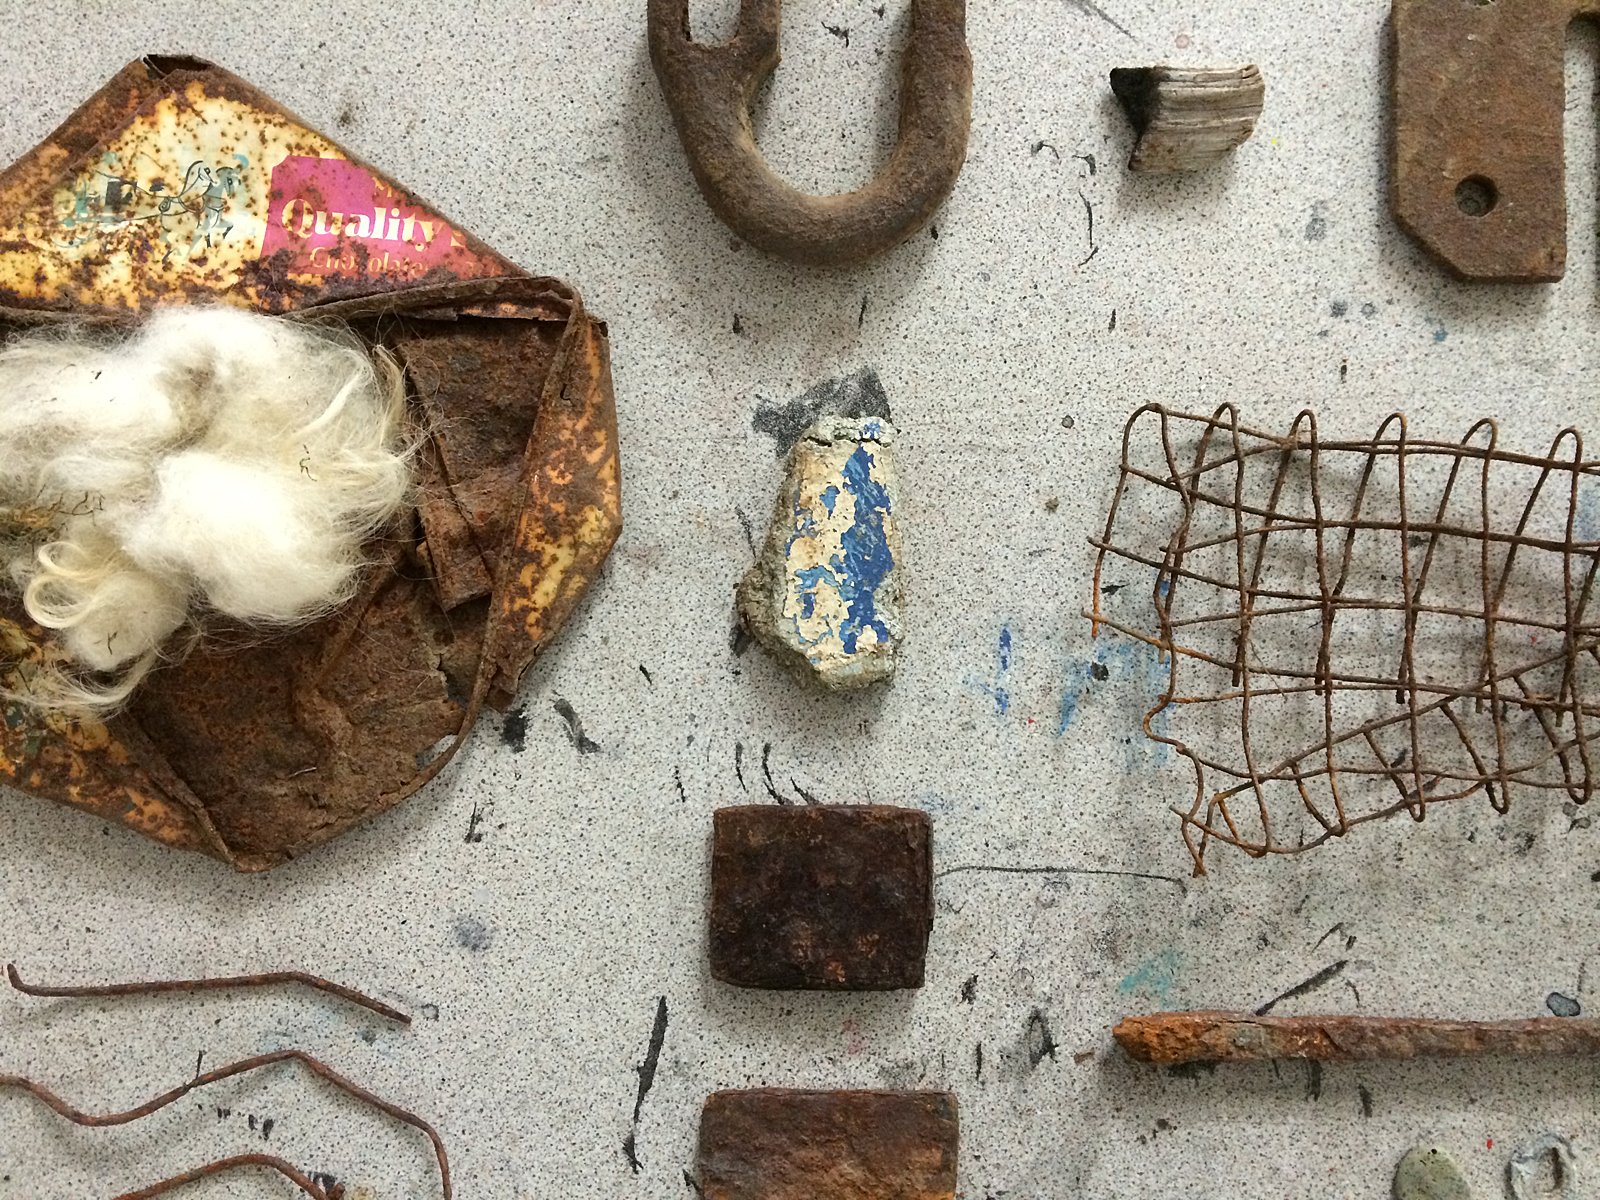 A closeup of rusted and other found objects placed on a grey speckled surface.